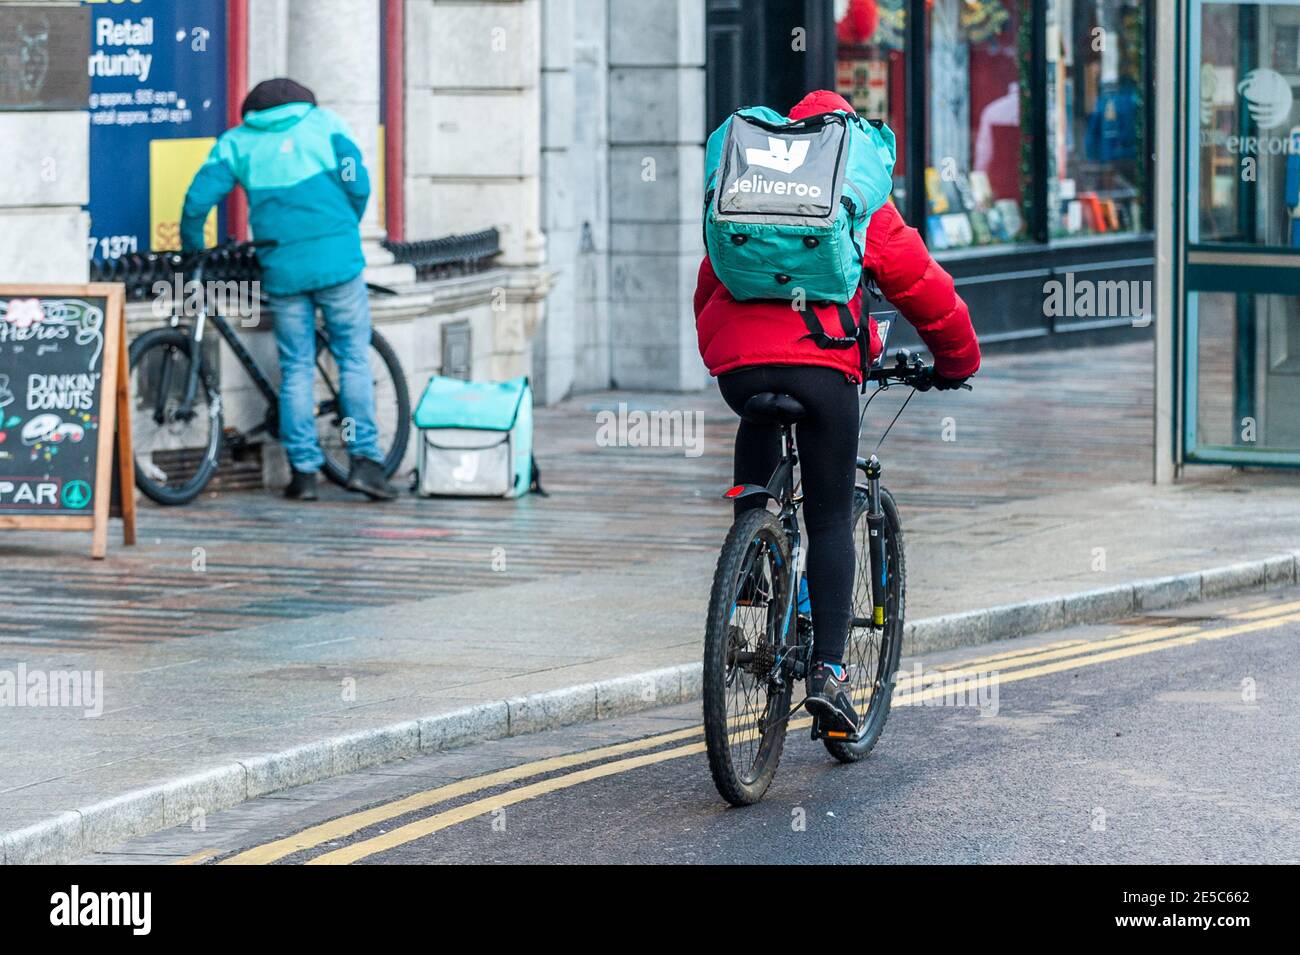 Deliveroo Food Delivery Riders in Cork, Irland. Stockfoto